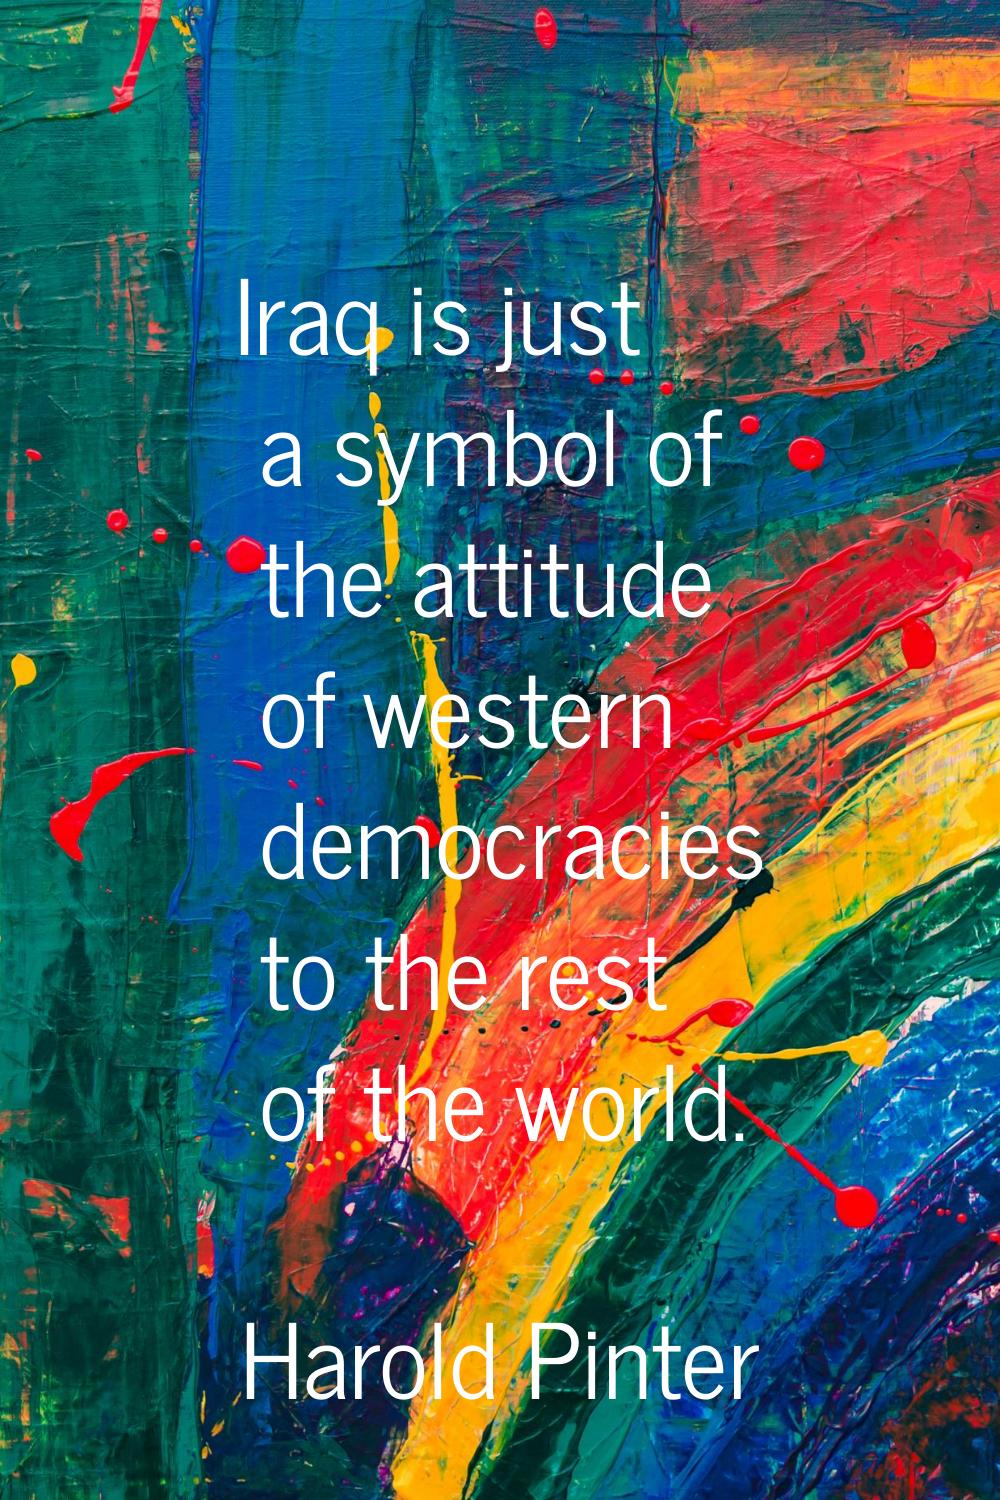 Iraq is just a symbol of the attitude of western democracies to the rest of the world.